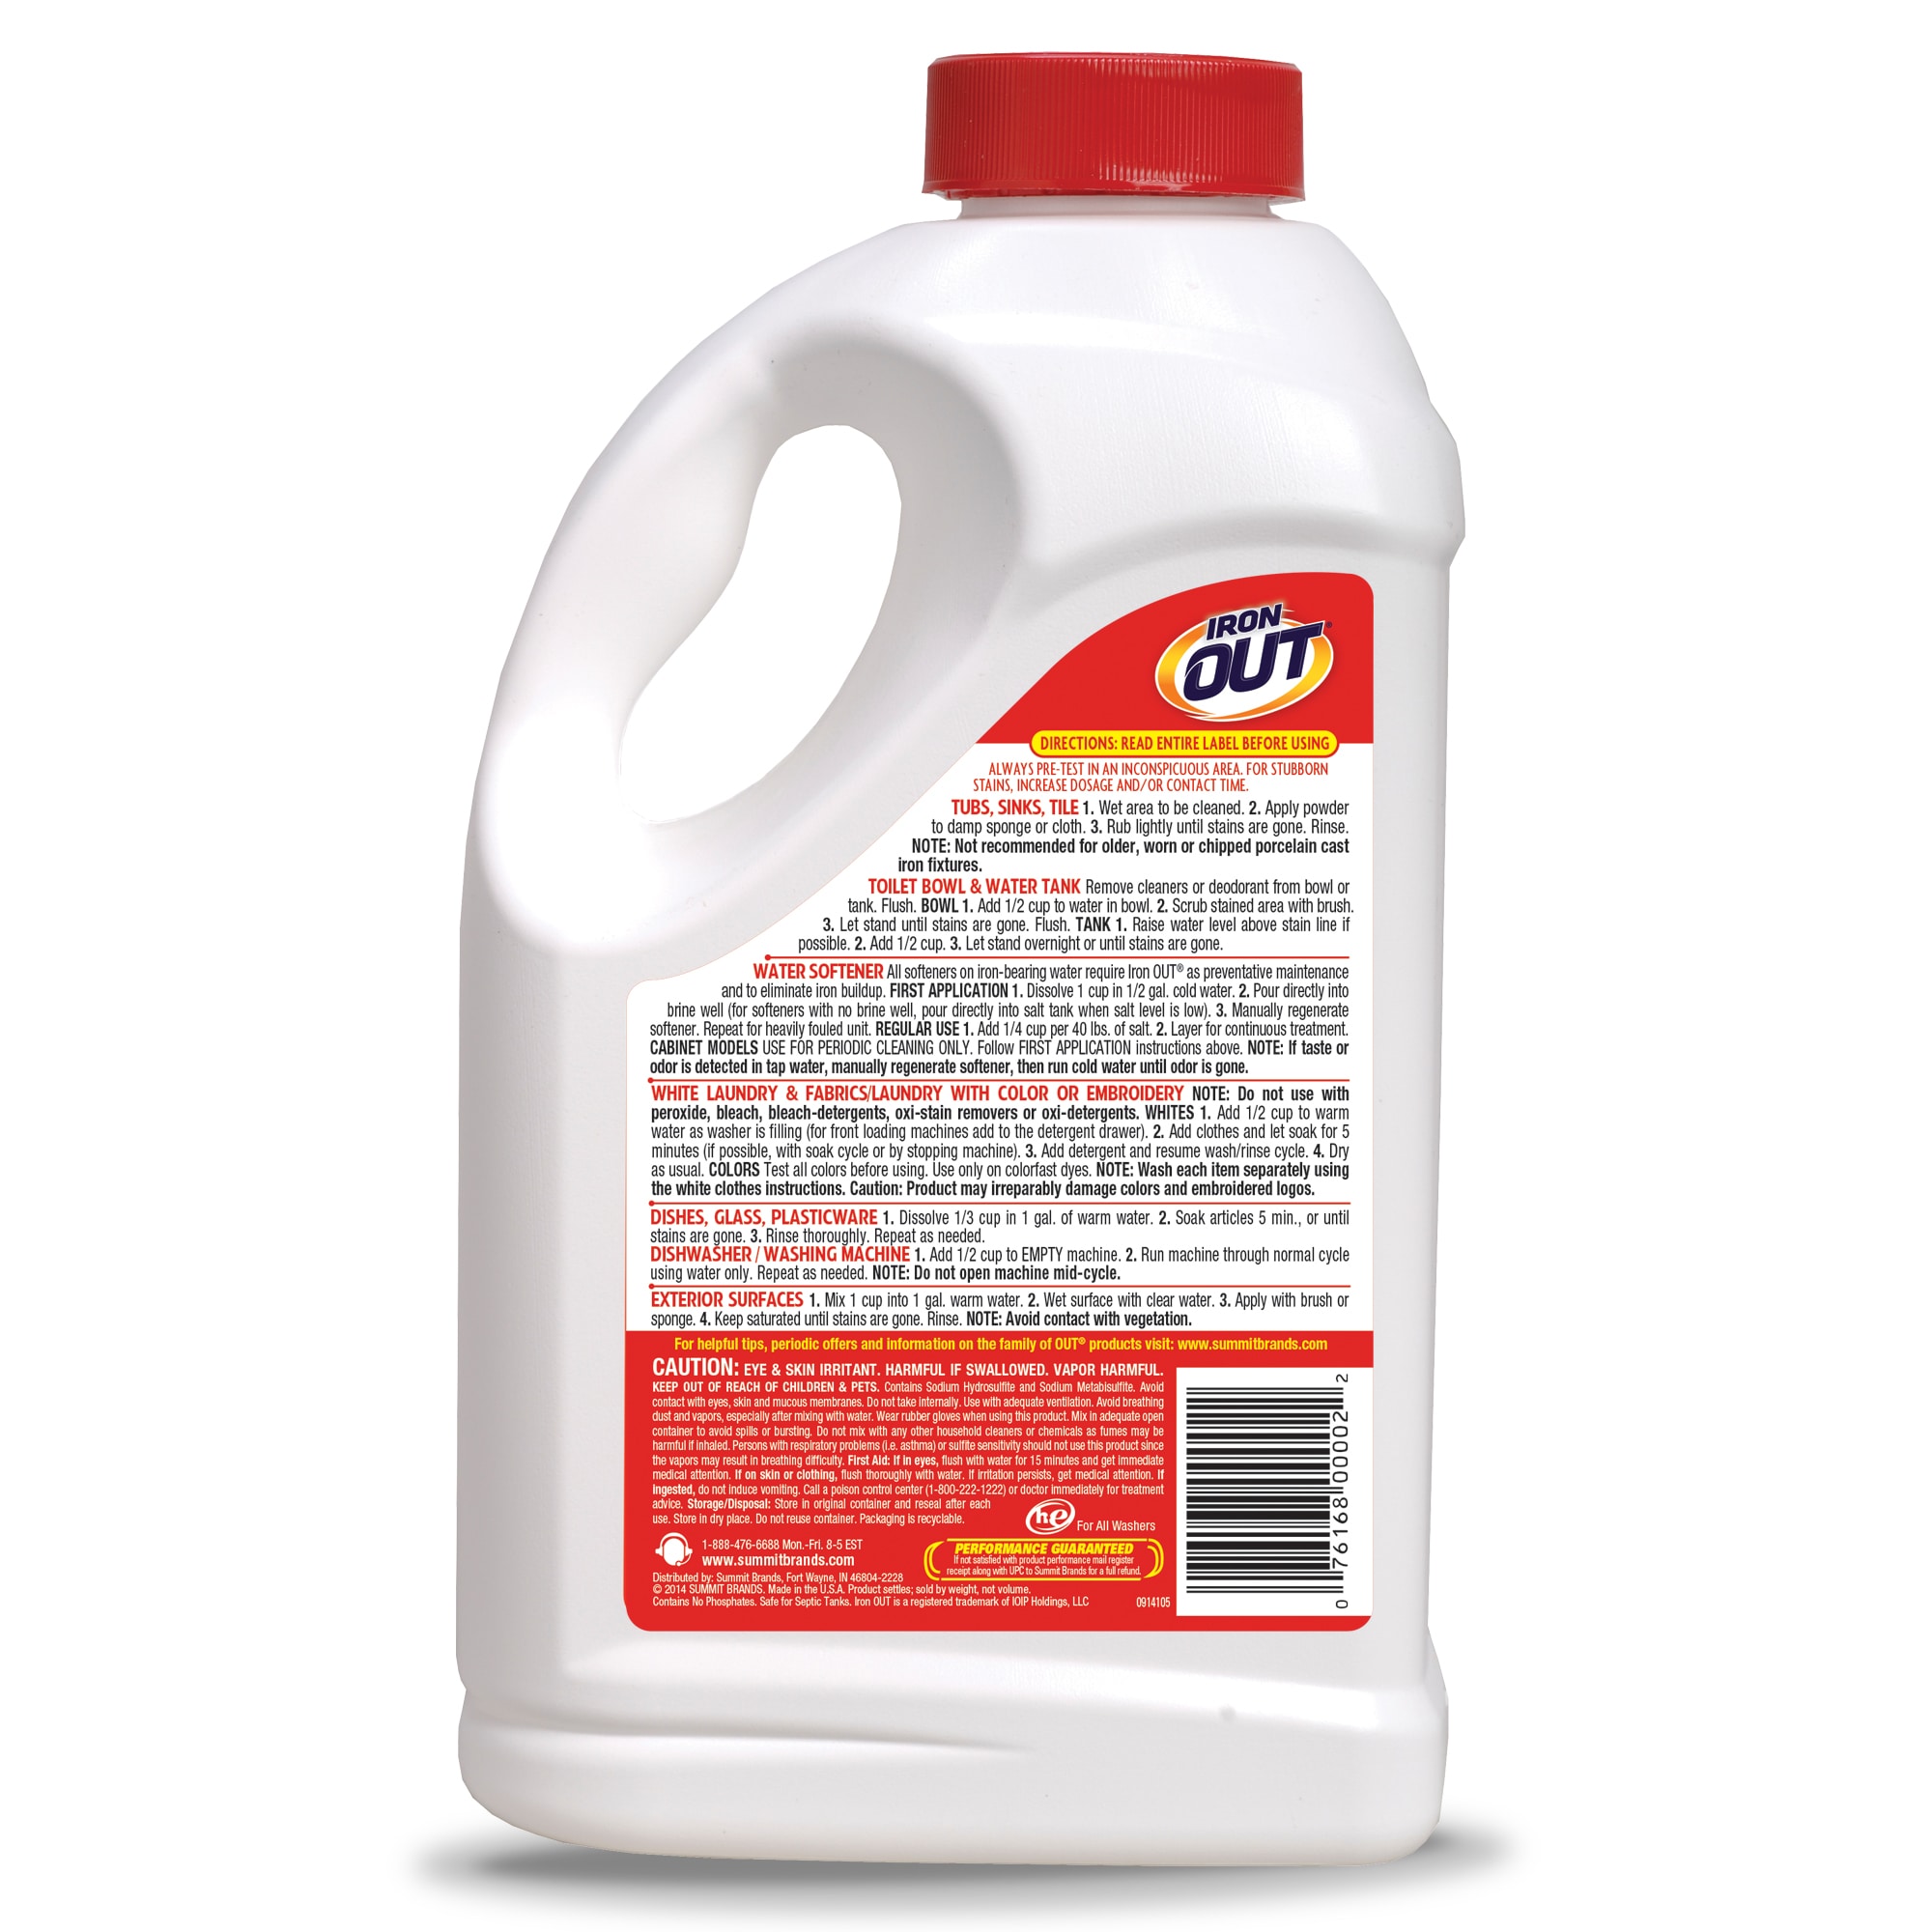 Super Iron Out 76-oz Multi-Purpose Rust and Stain Remover for Toilets,  Sinks, Tubs, Dishwashers, Tile, and Laundry